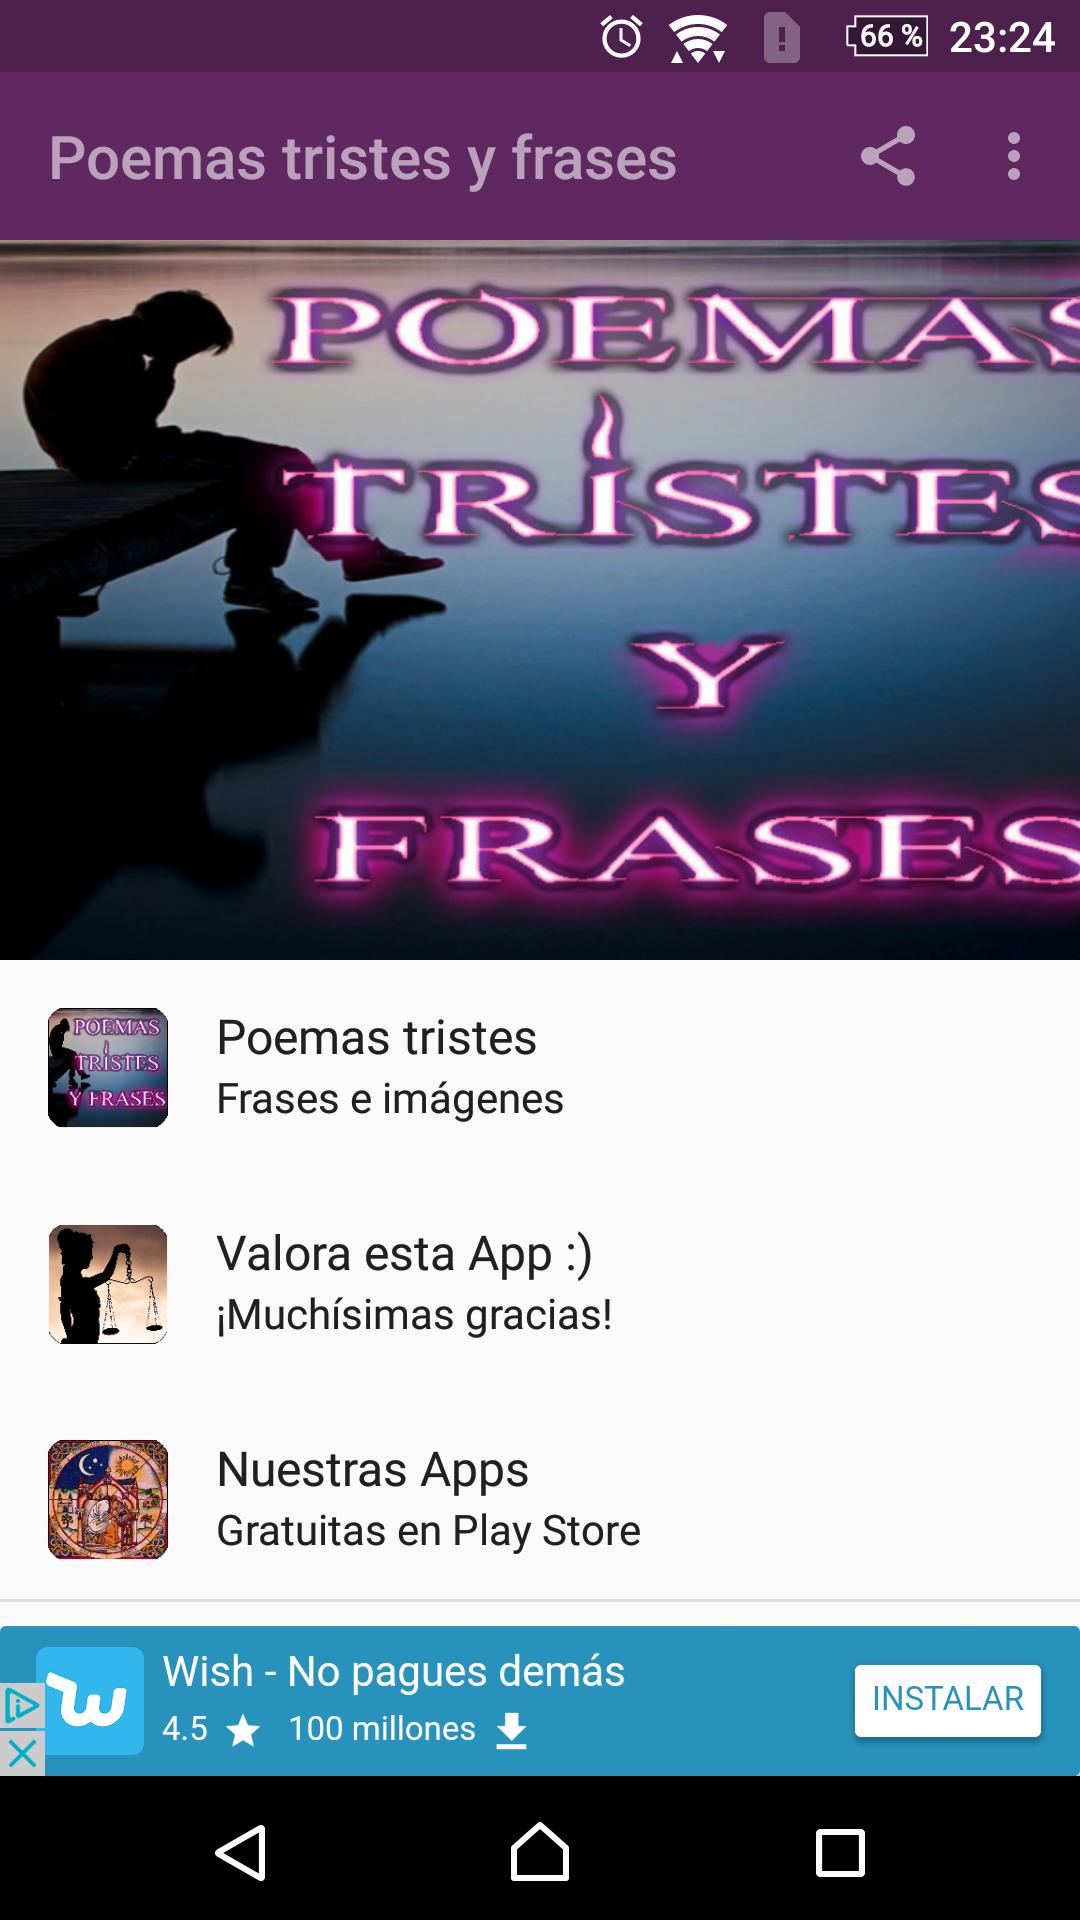 Download Poemas tristes - Frases con im android on PC